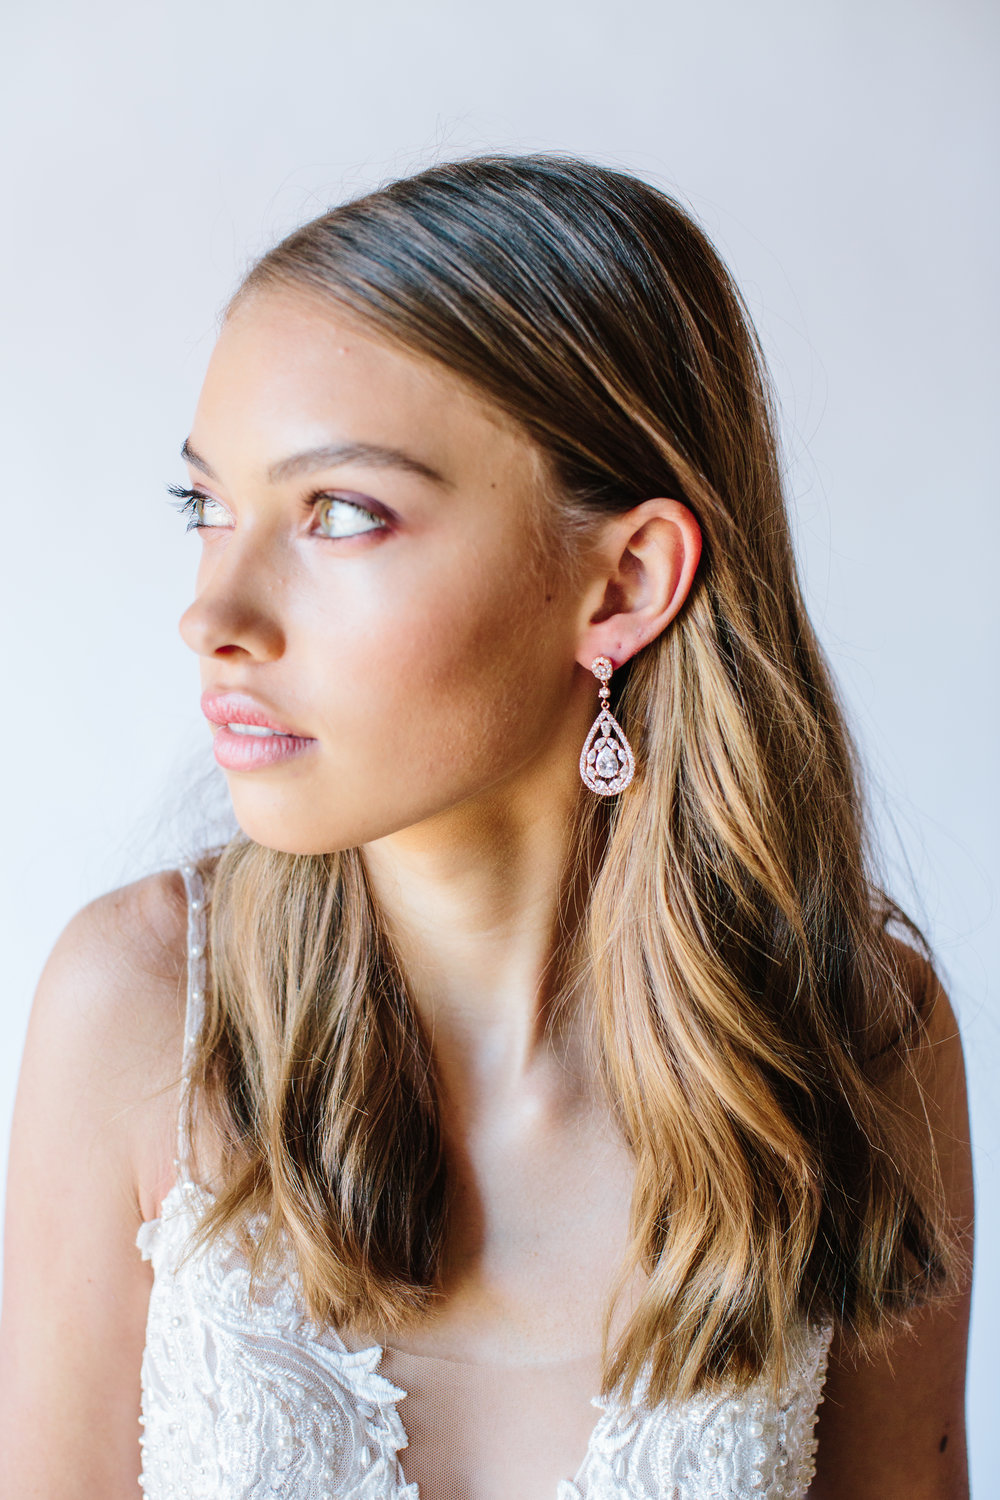 rose gold statement earrings